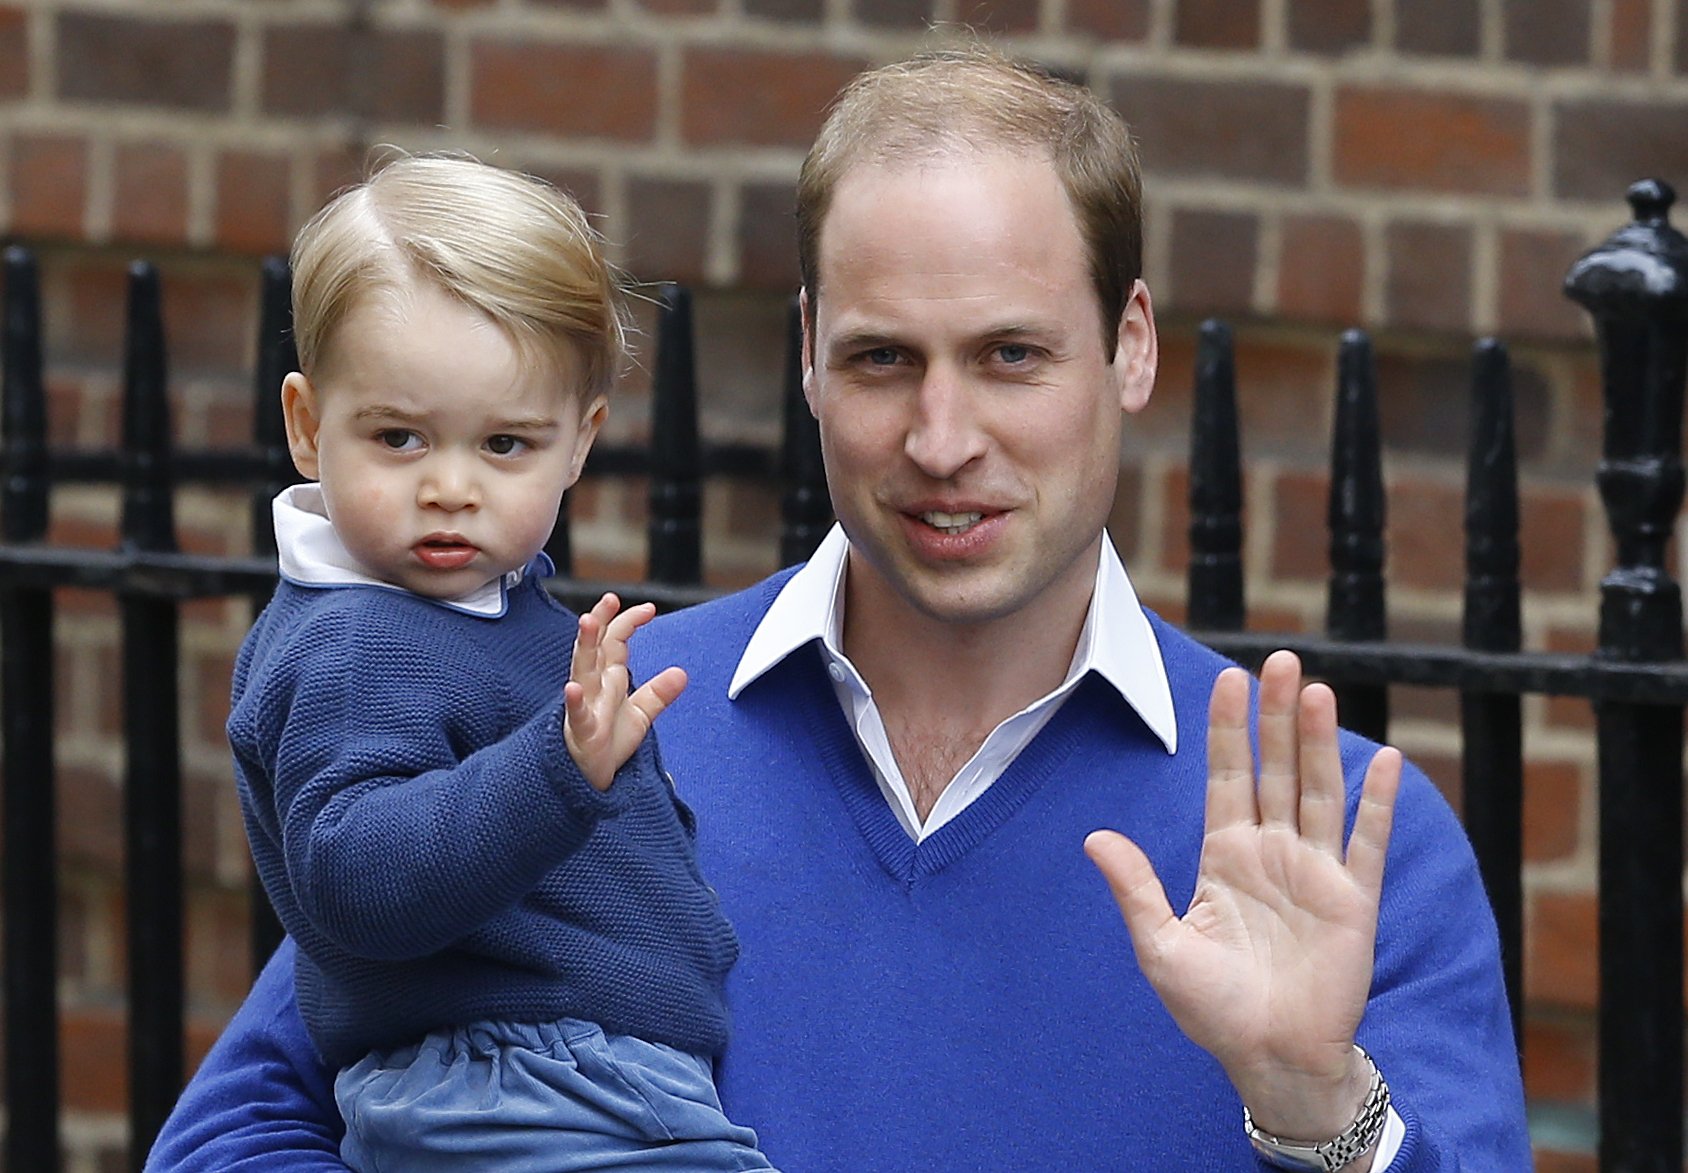 FILE - In this Saturday, May 2, 2015 file photo, Britain's Prince William and his son Prince George wave as they return to St. Mary's Hospital's exclusive Lindo Wing, London. William's wife, Kate, the Duchess of Cambridge, gave birth to a baby girl on Saturday morning.  Britains royals on Wednesday July 22 ,2015 celebrate the second birthday of George, the first child of Prince William and his wife, Kate.   (AP Photo/Kirsty Wigglesworth, file)